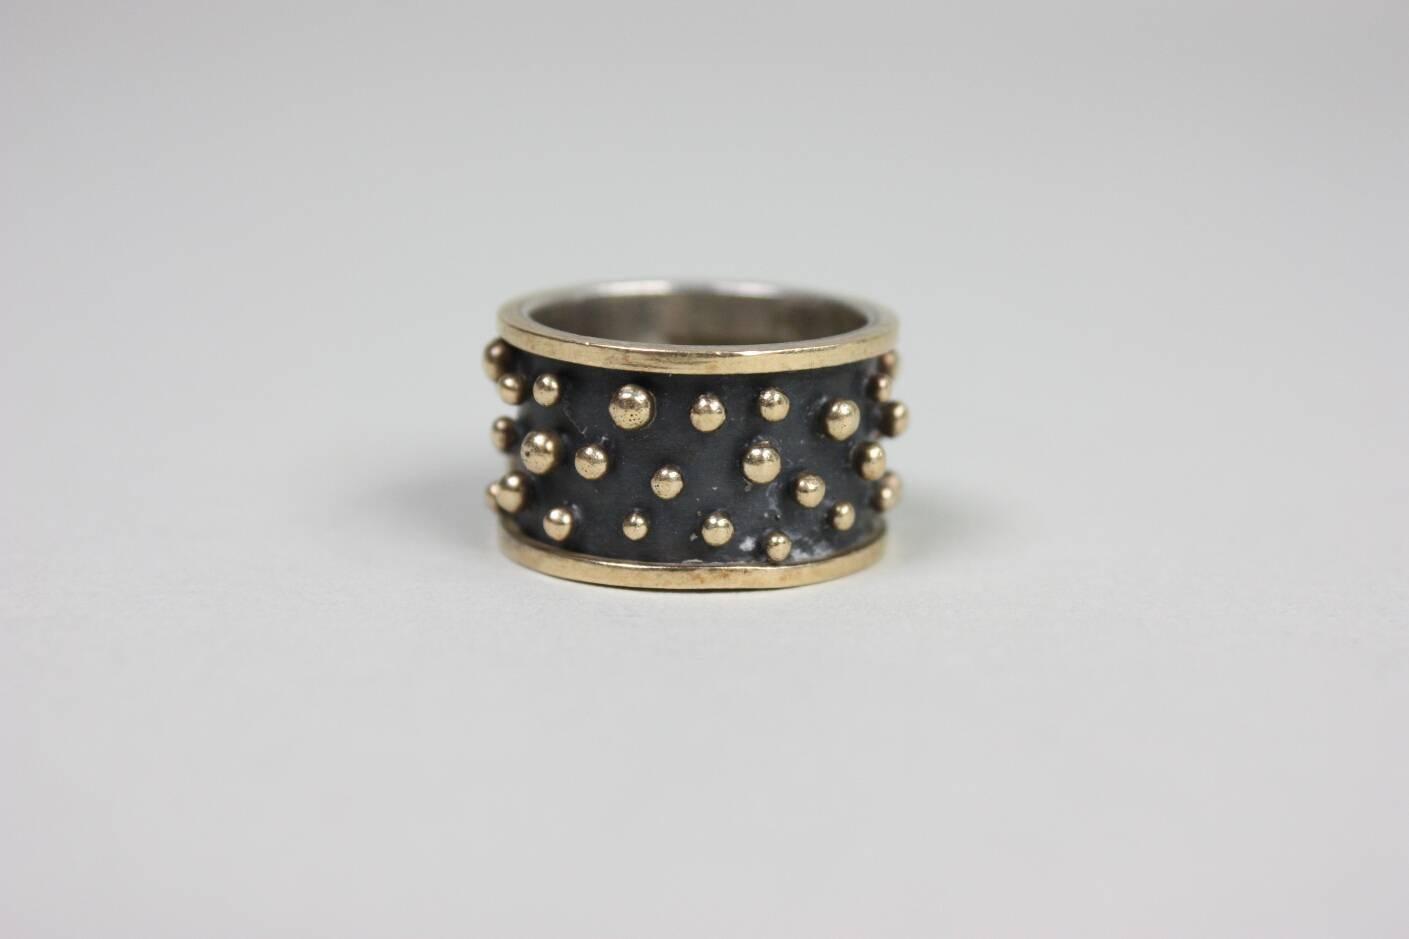 Ring from the late New Orleans designer Anne Pratt is made of sterling silver and 18 karat gold.  It is signed 925 & 18k.

Measurements-
Interior Diameter: 3/4